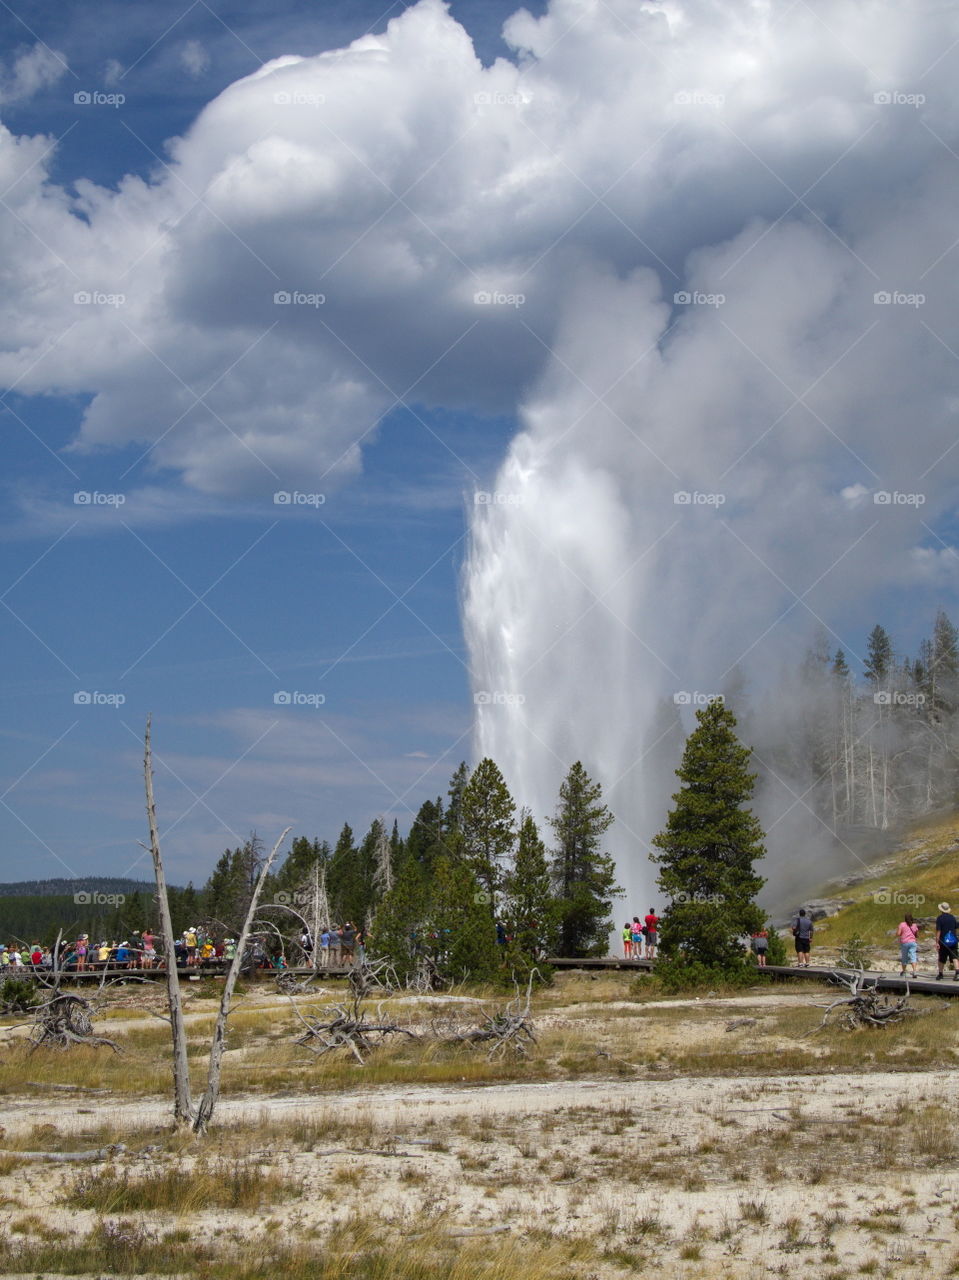 The Grand Geyser on Geyser Hill in Yellowstone National Park erupts to the delight of a crowd on a sunny summer day. 